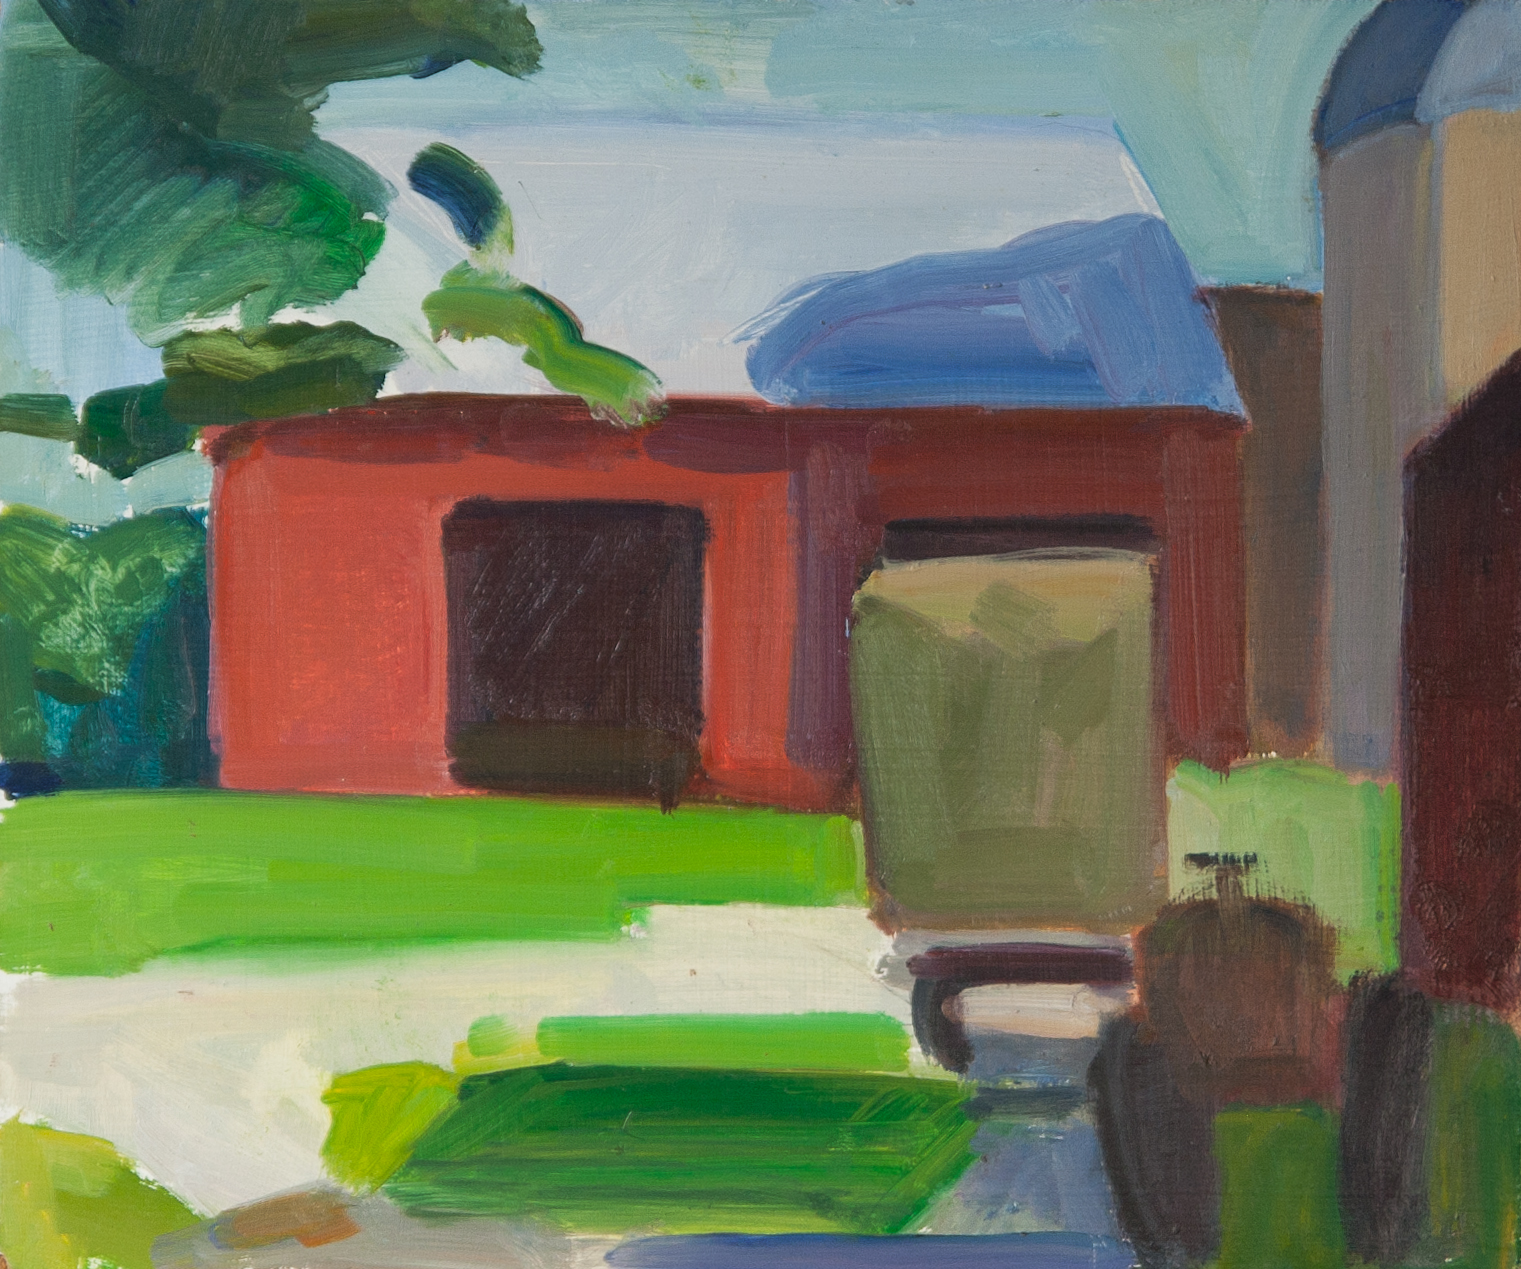   Rydel Farm, Barn and Tractor , ca. 2003, oil on panel, 10" x 12"  (Private collection)  